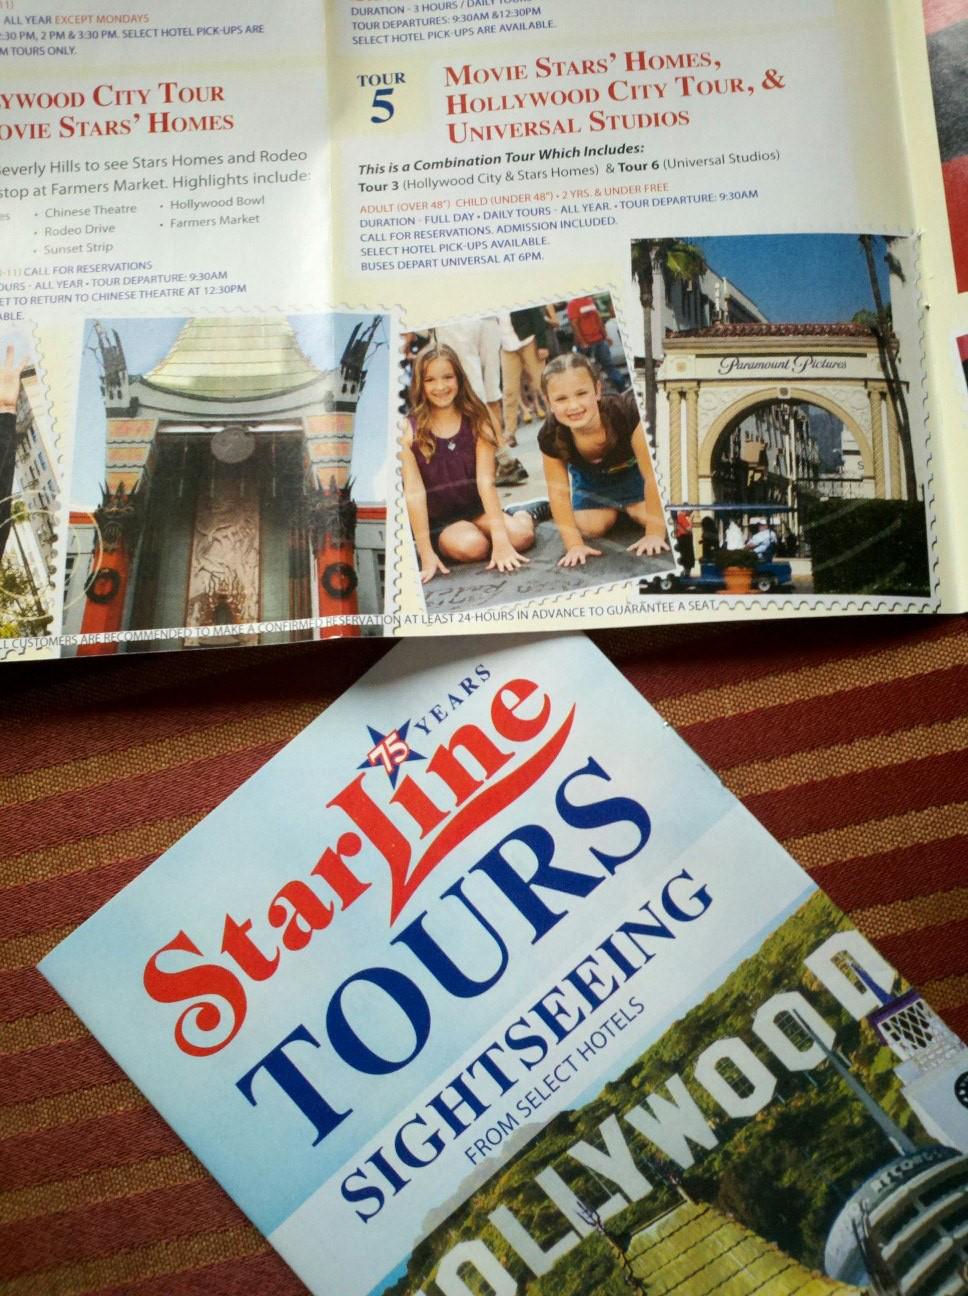 Starline Tours of Hollywood brochure 2012/2013 LA Shoot This! Photo Group JLP Model and Talent